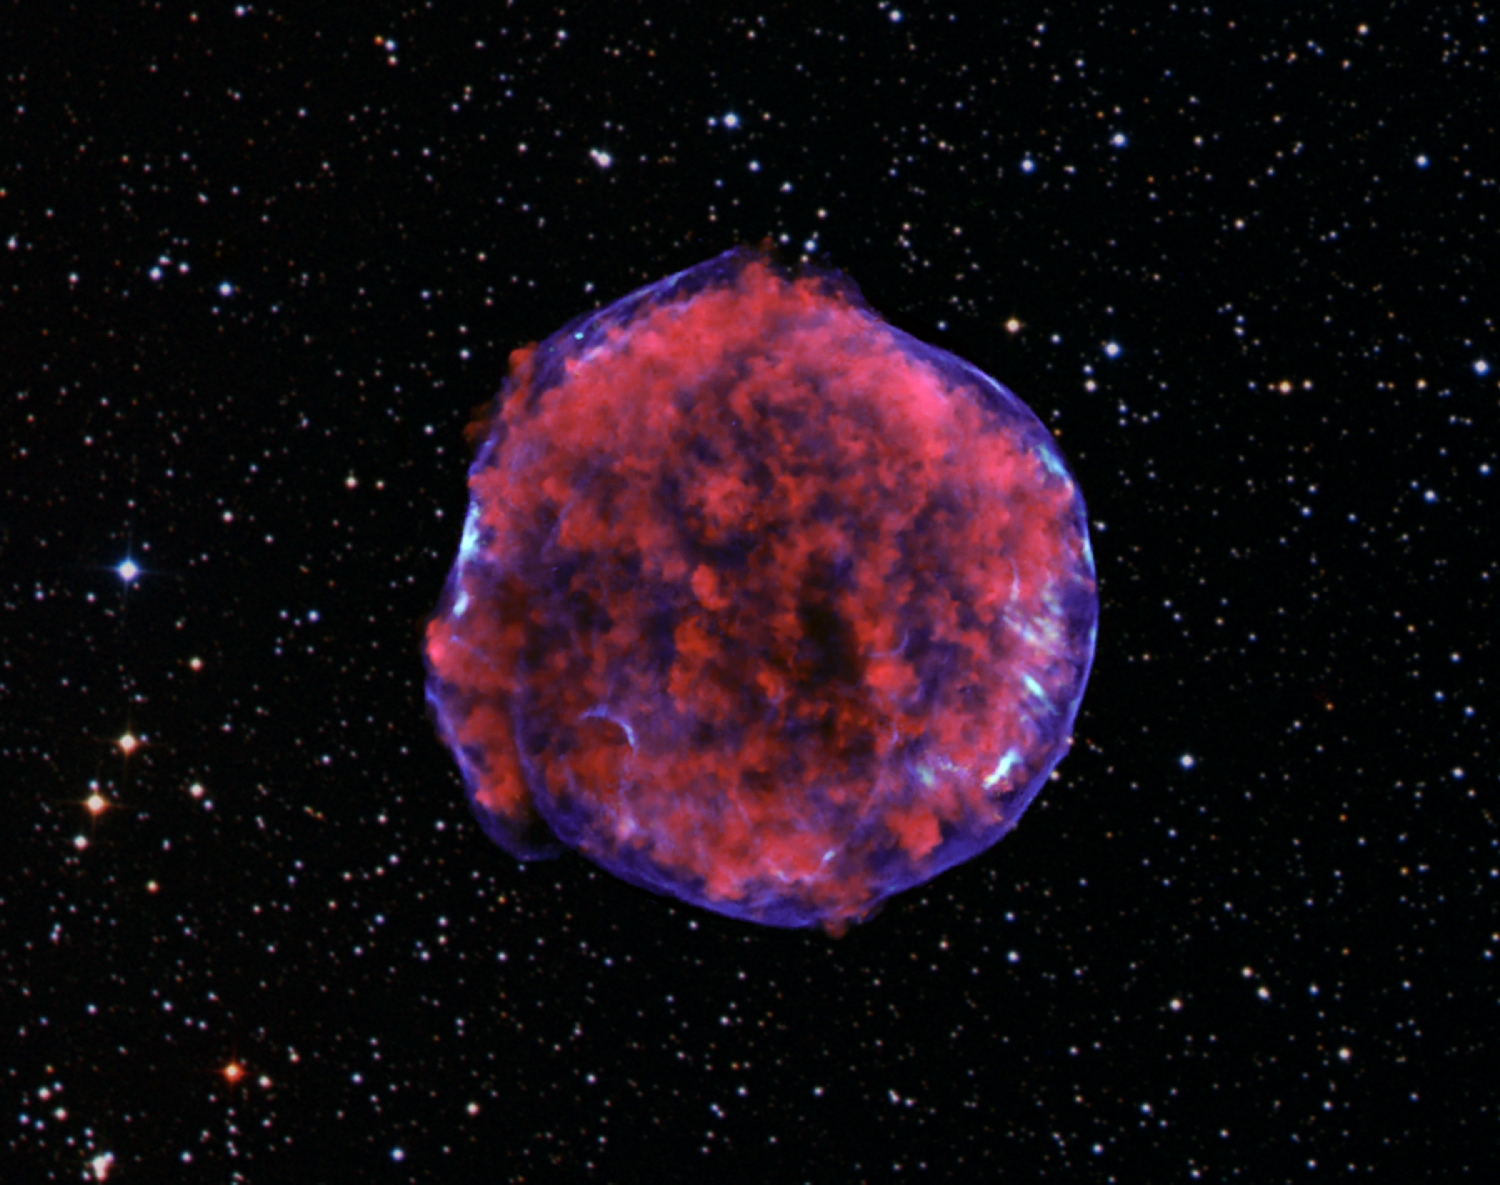 A photograph of the Tycho supernova remnant taken by the Chandra X-ray Observatory. Low-energy X-rays (red) in the image show expanding debris from the supernova explosion and high energy X-rays (blue) show the blast wave, a shell of extremely energetic electrons.